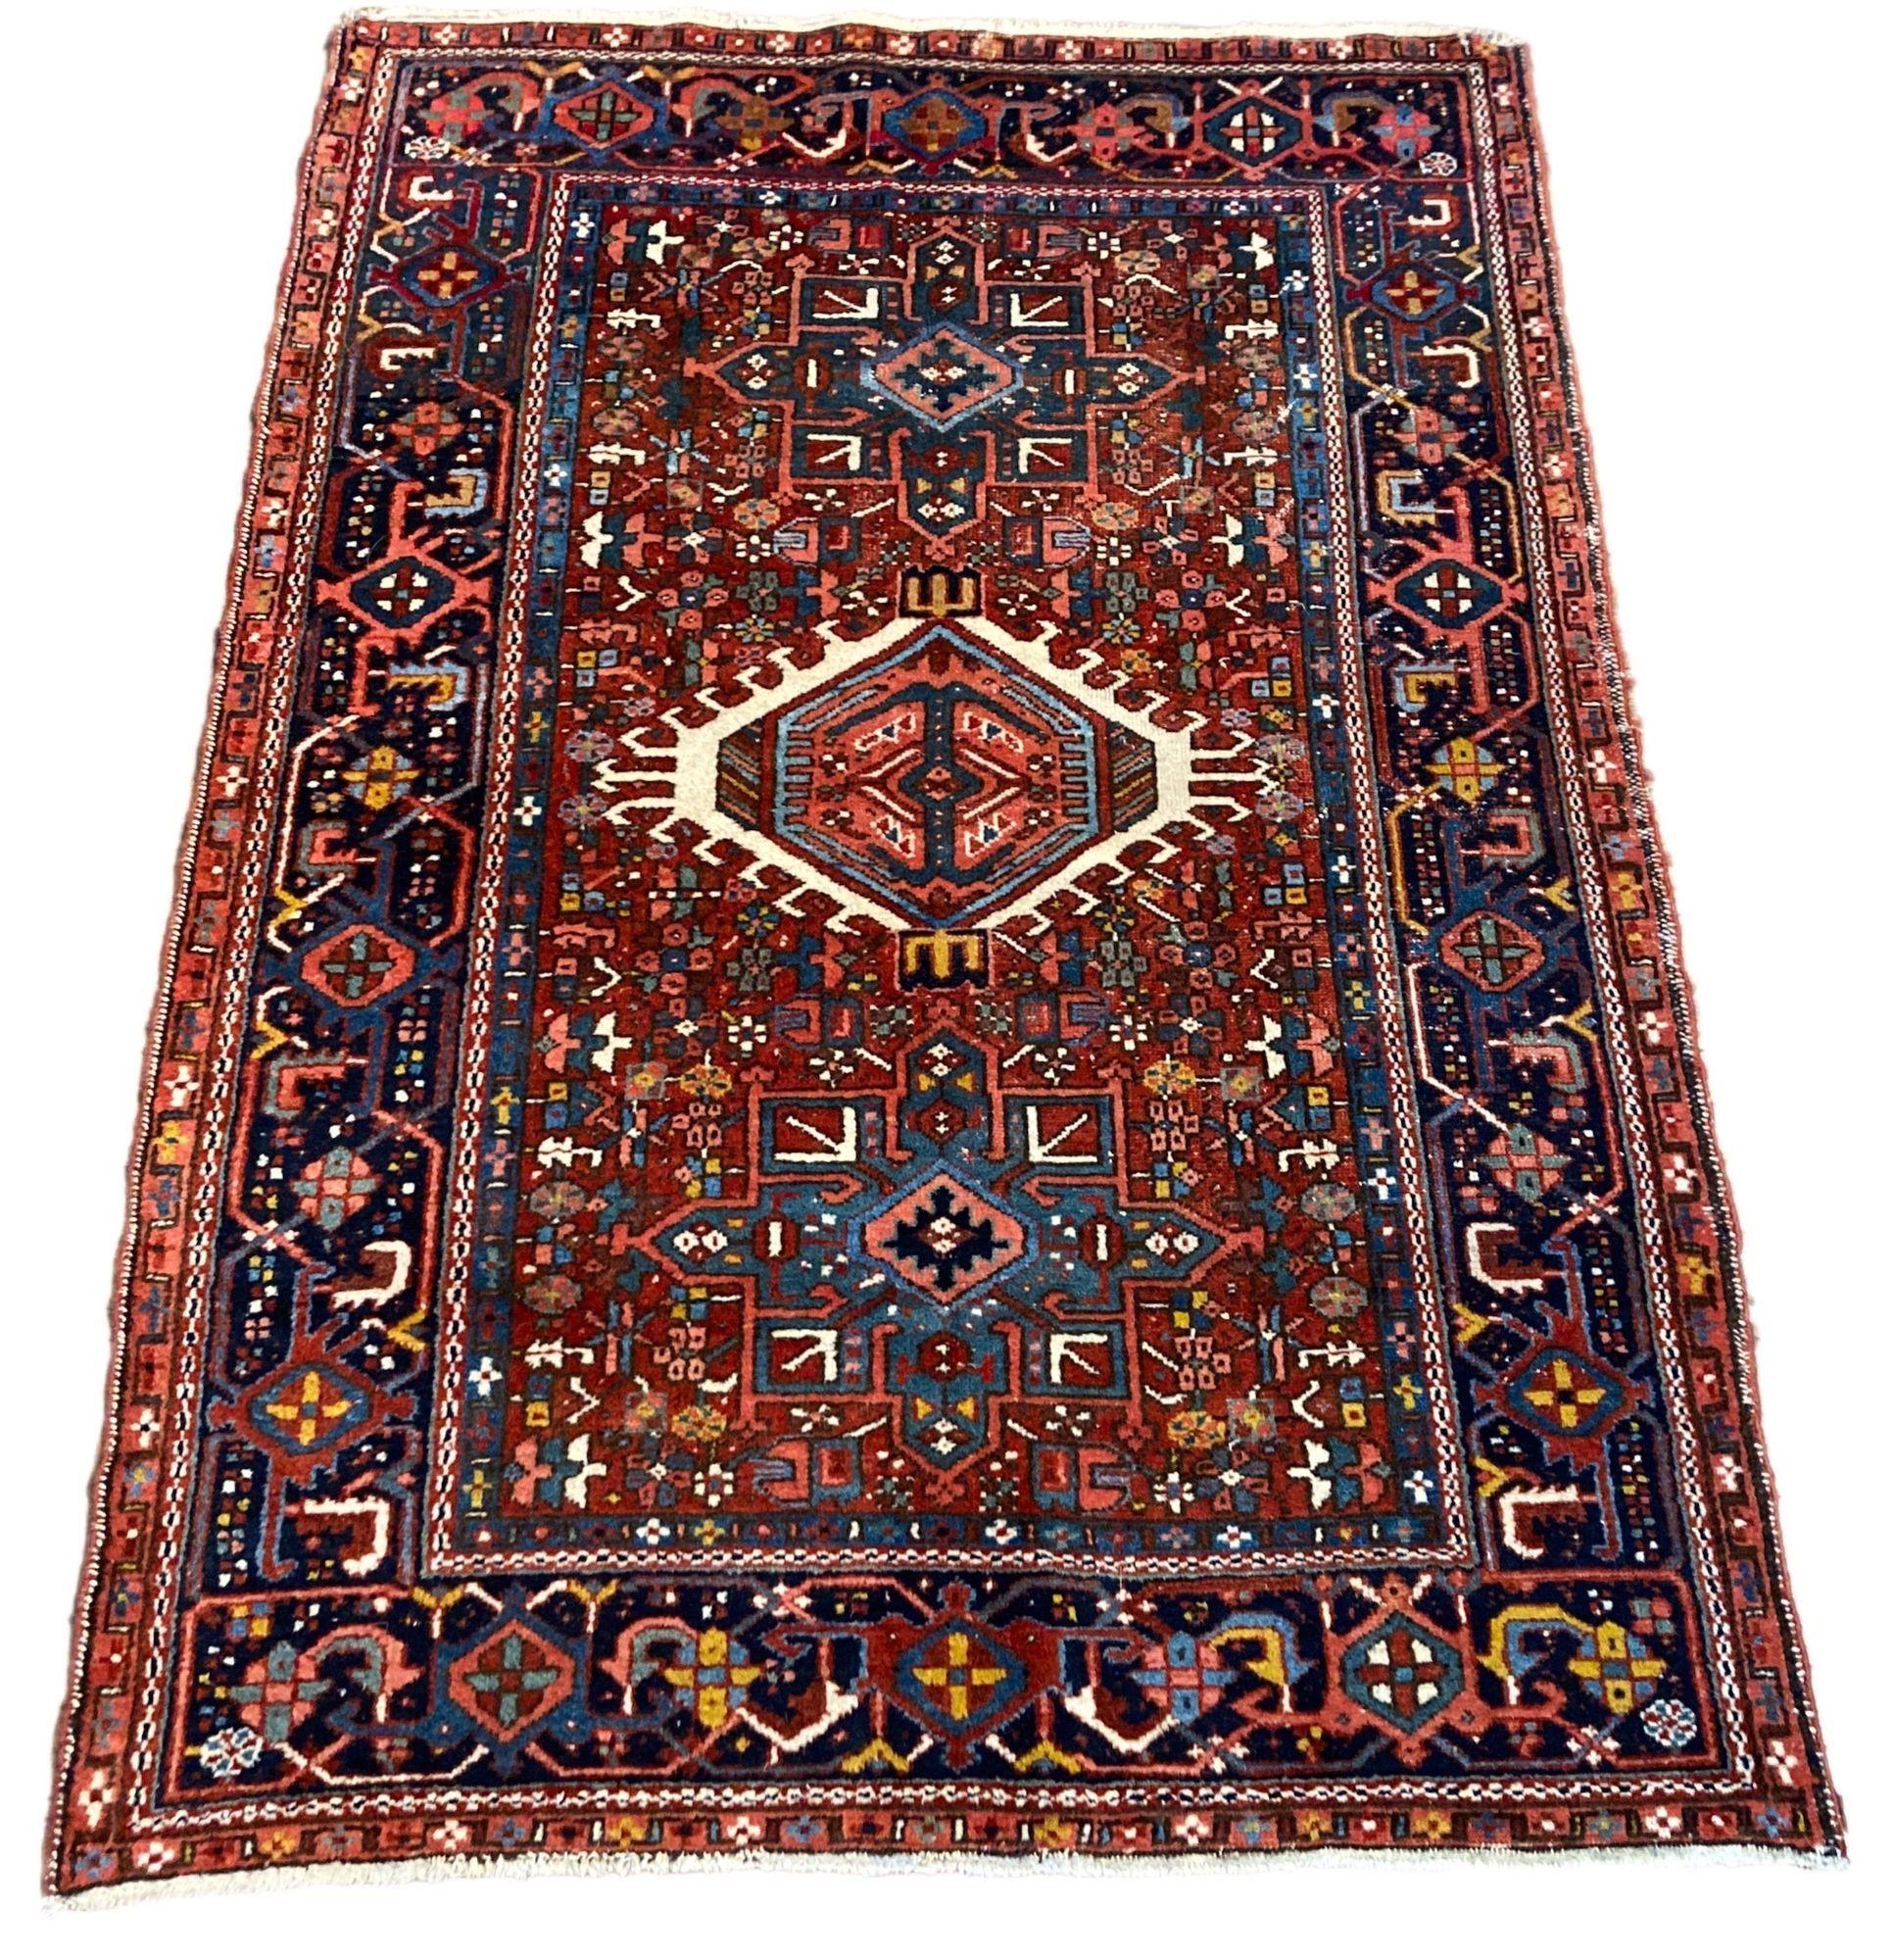 A beautiful antique Karadja rug, handwoven circa 1920 with a geometrical 3 medallion design on a terracotta field and deep indigo border. Fabulous secondary colours, especially the gold throughout the field and a highly decorative piece.
Size: 1.93m